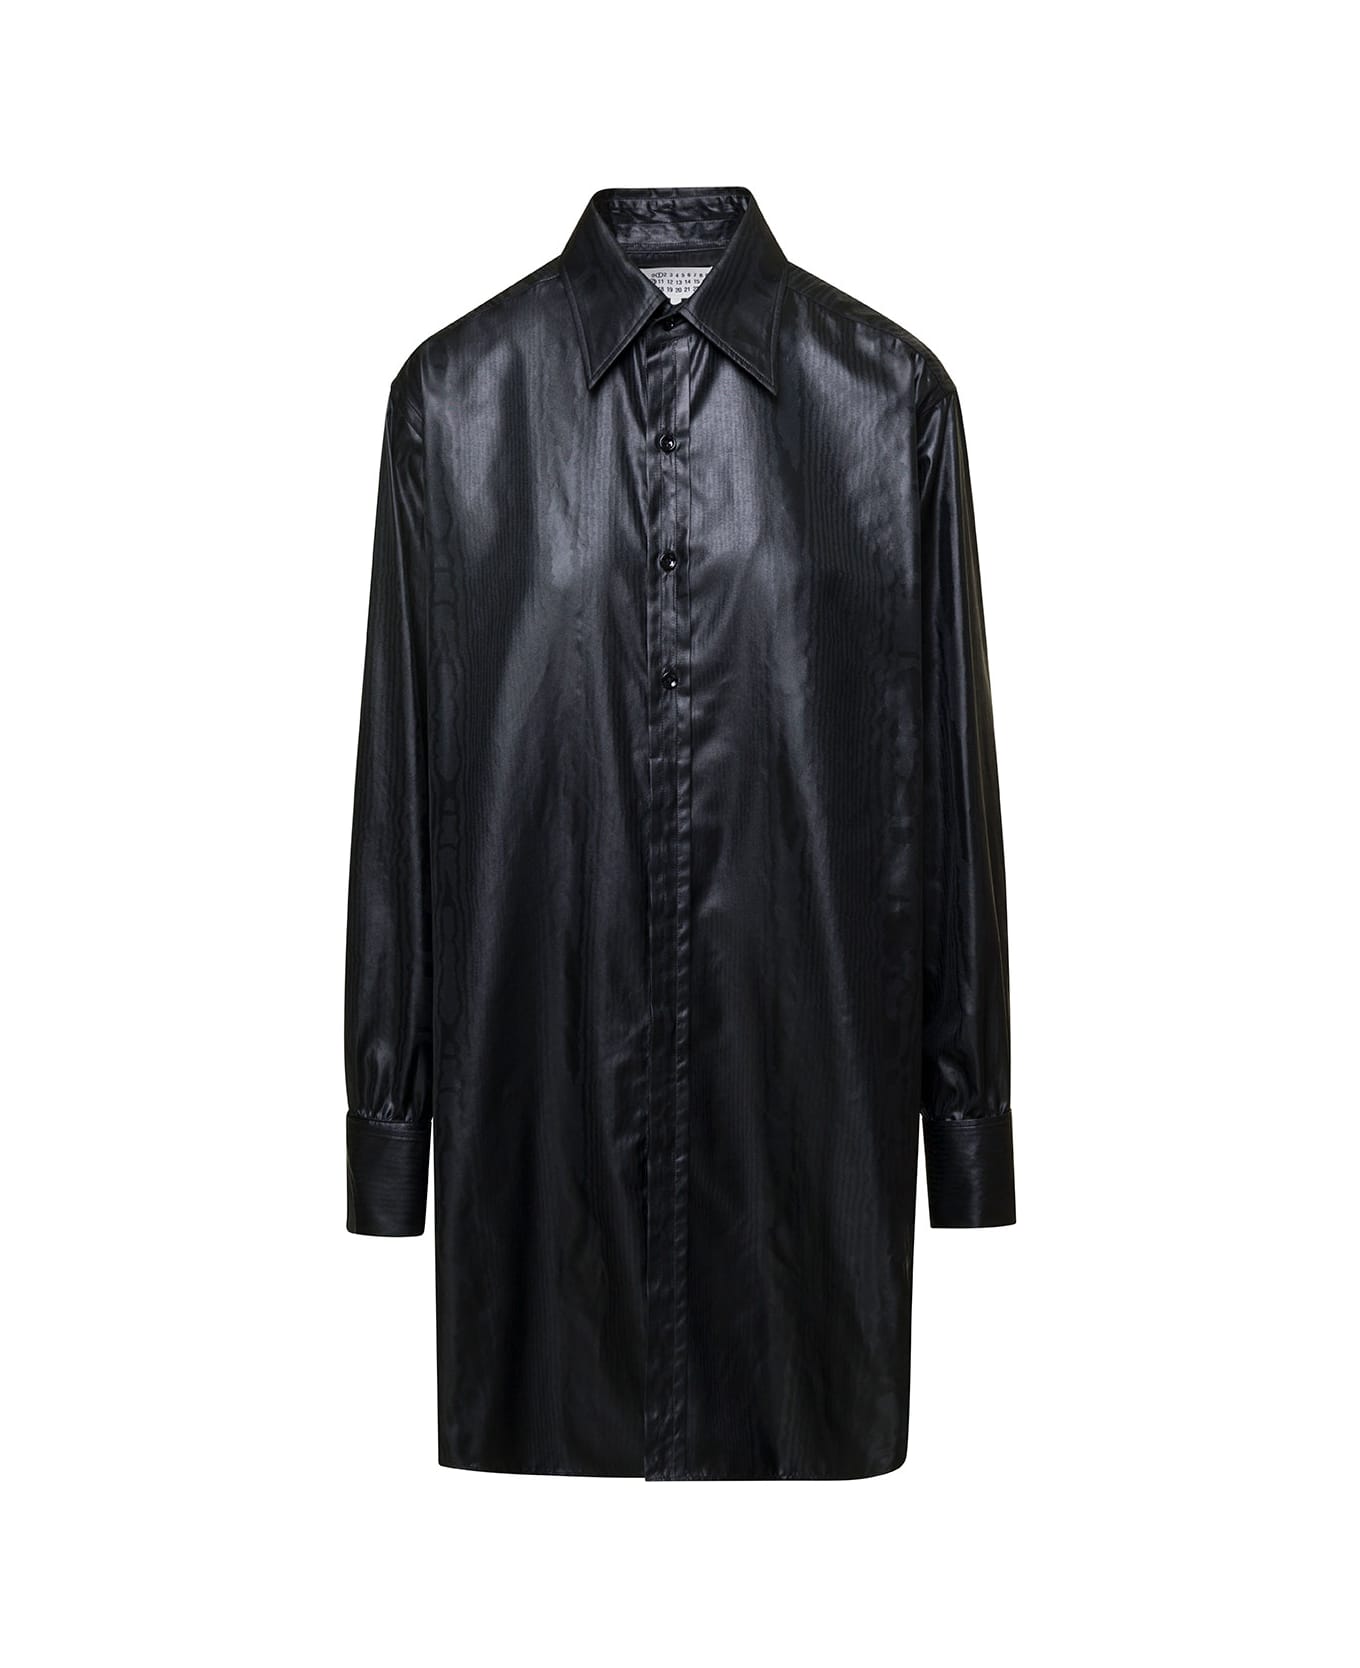 Maison Margiela Long Black Shirt With Classic Collar In Faux Leather Woman - Black シャツ